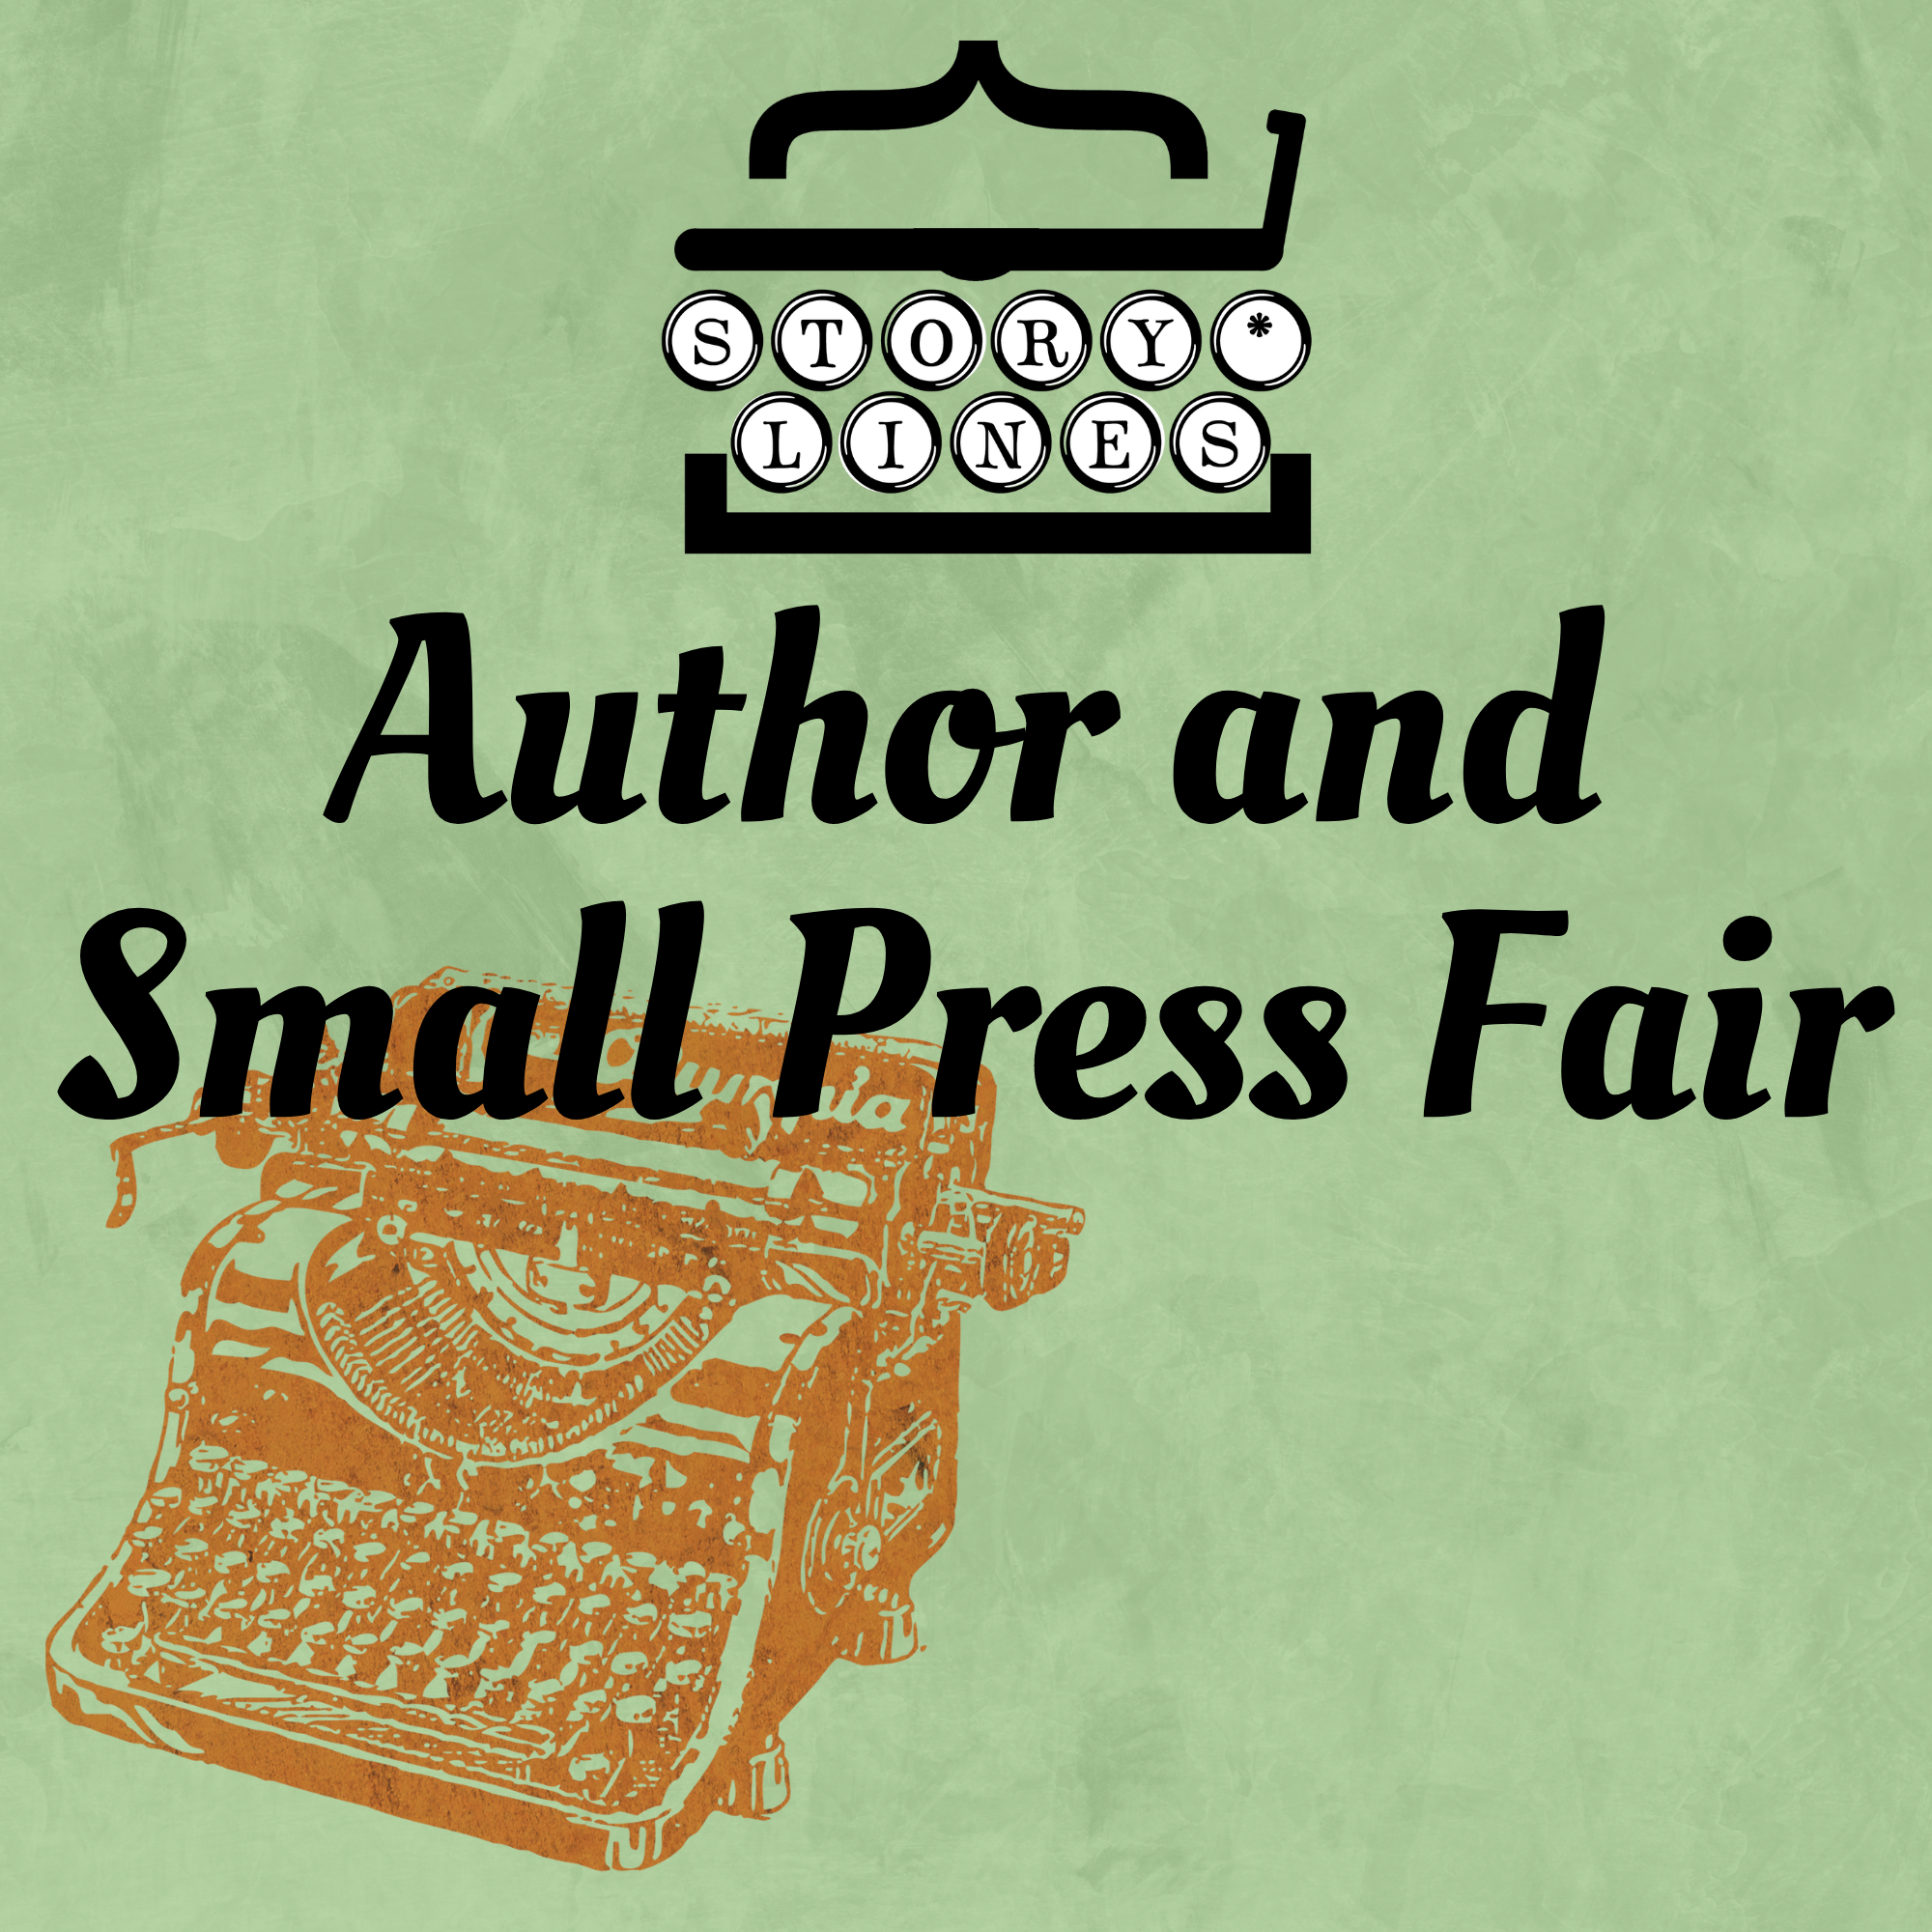 Green background with orange typewriter image in foreground with black text Author and Small Press Fair